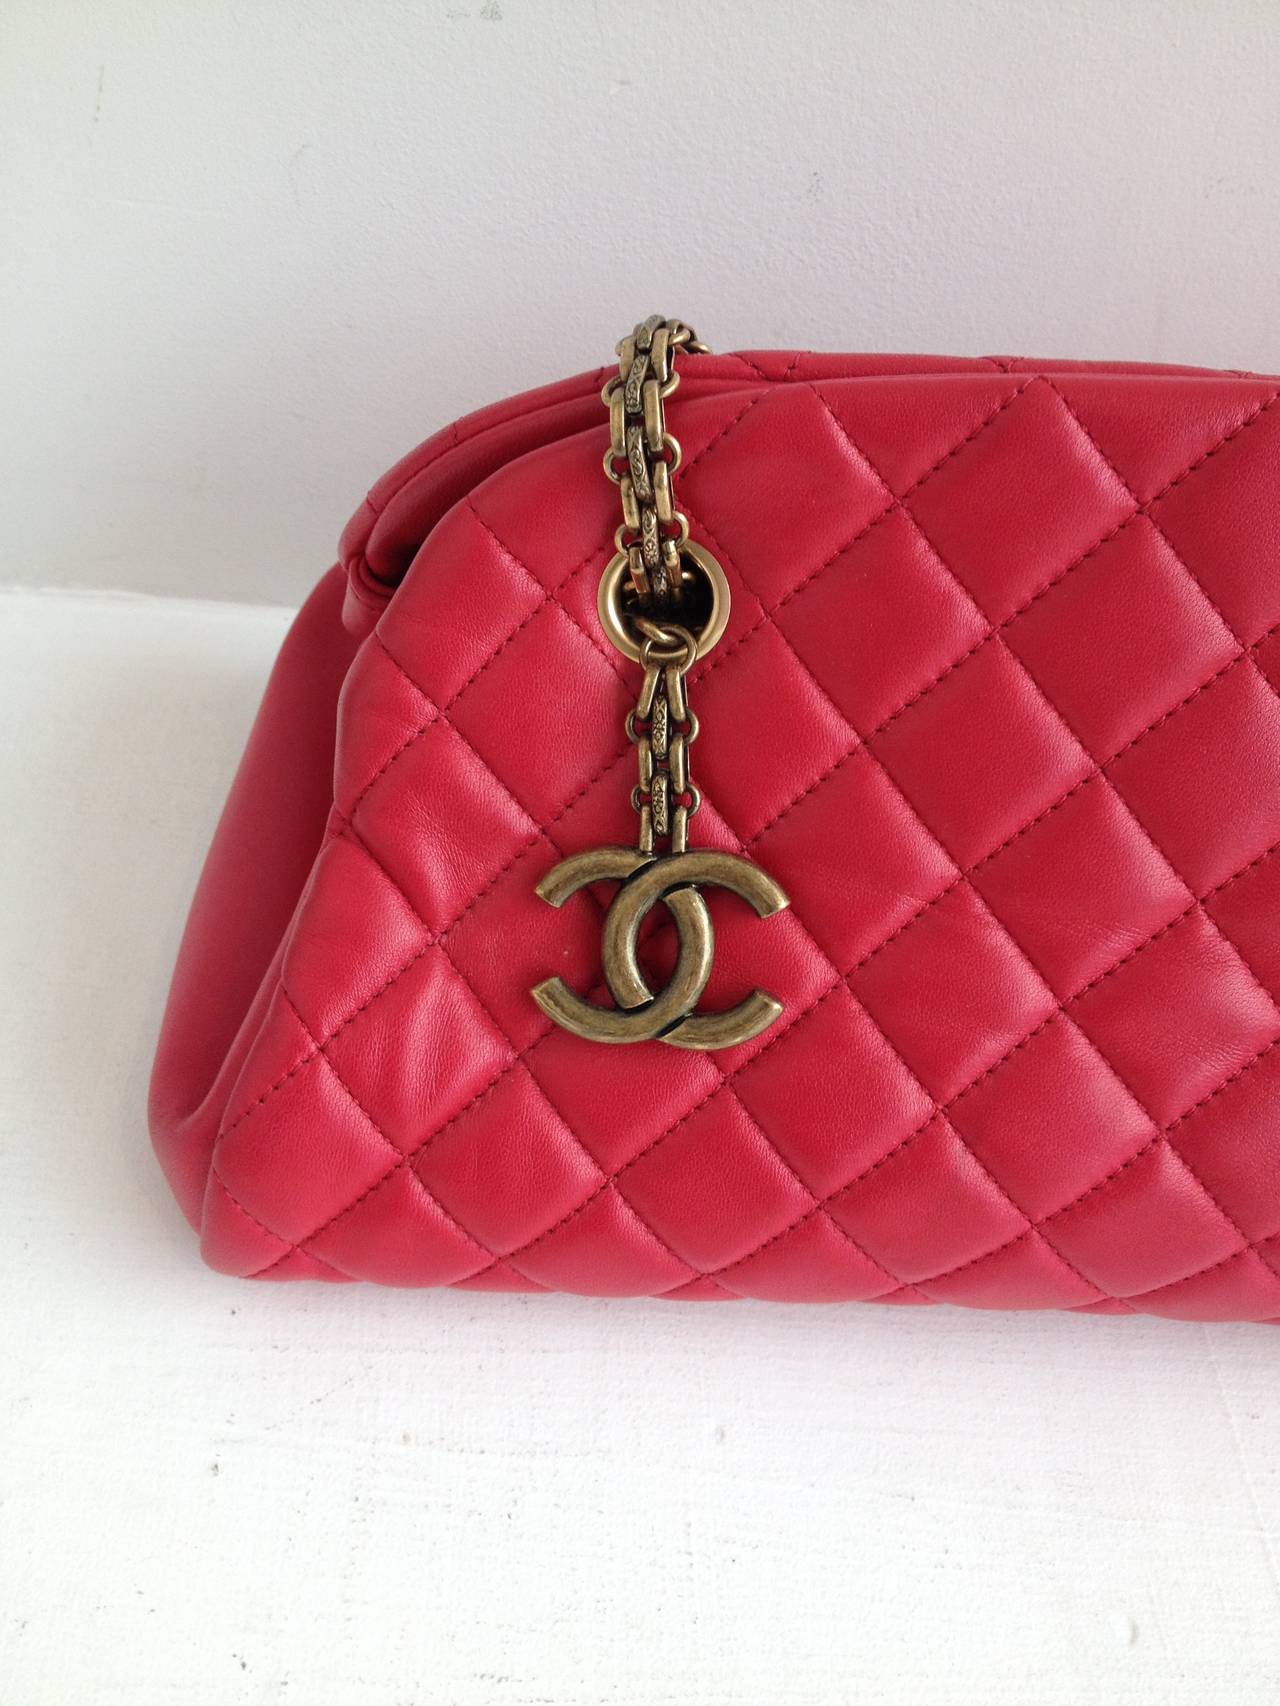 We're in love with this Chanel bag. Red lambskin leather is super soft and supple, and the triangular bar shape of the bag is cool and unusual. The interior features three parallel pockets, one zippered, with one extra leather pocket on one side and